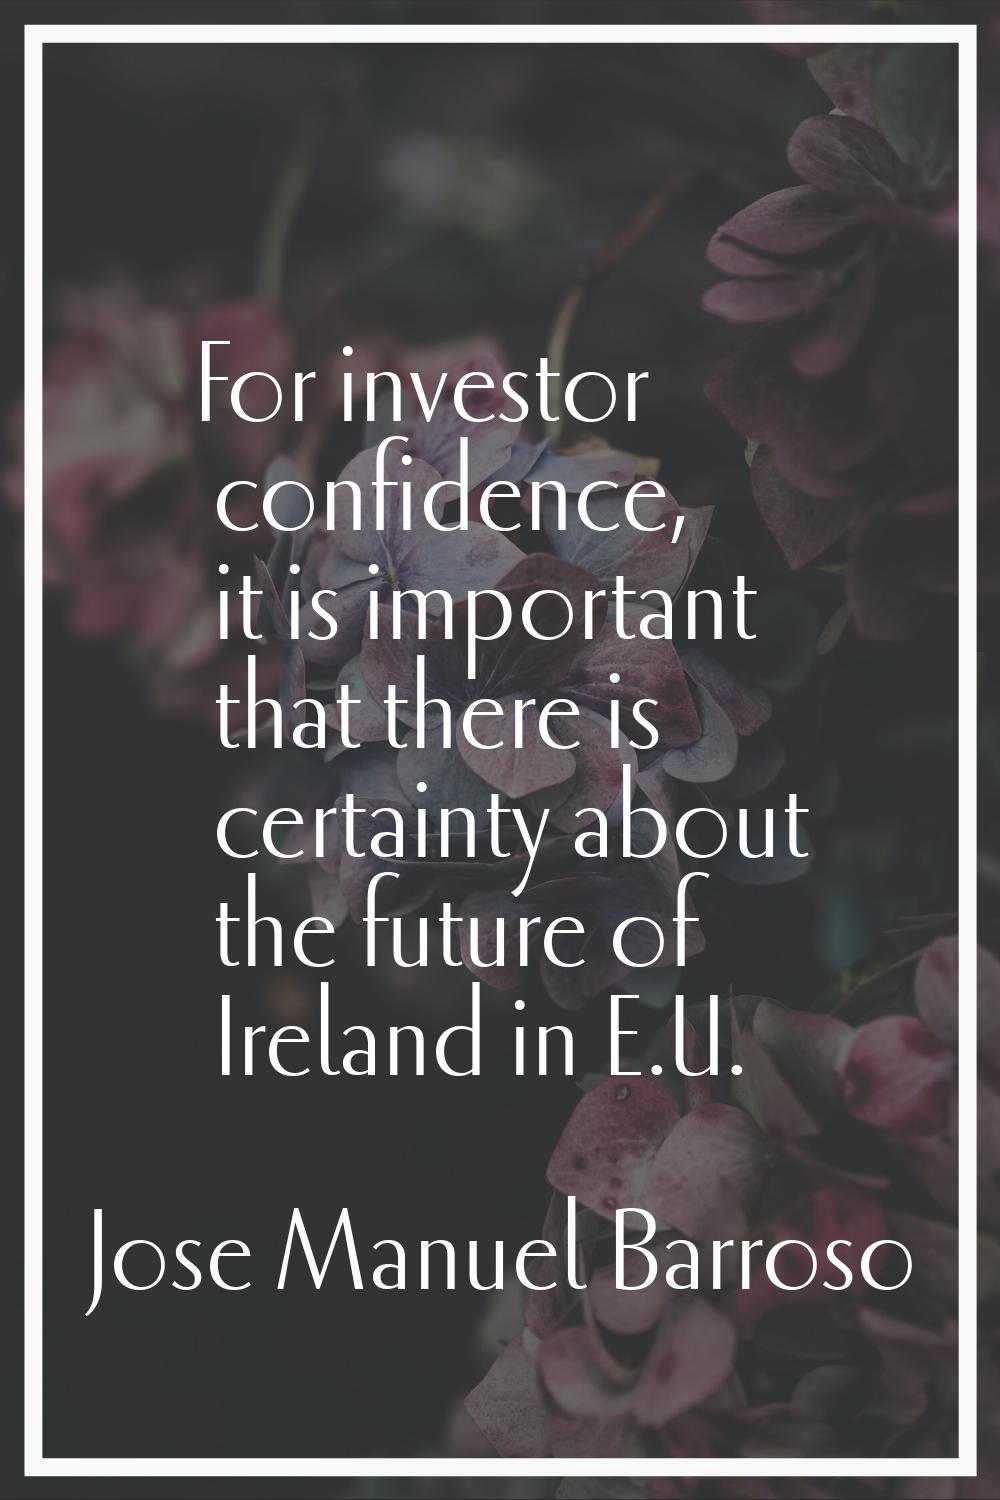 For investor confidence, it is important that there is certainty about the future of Ireland in E.U